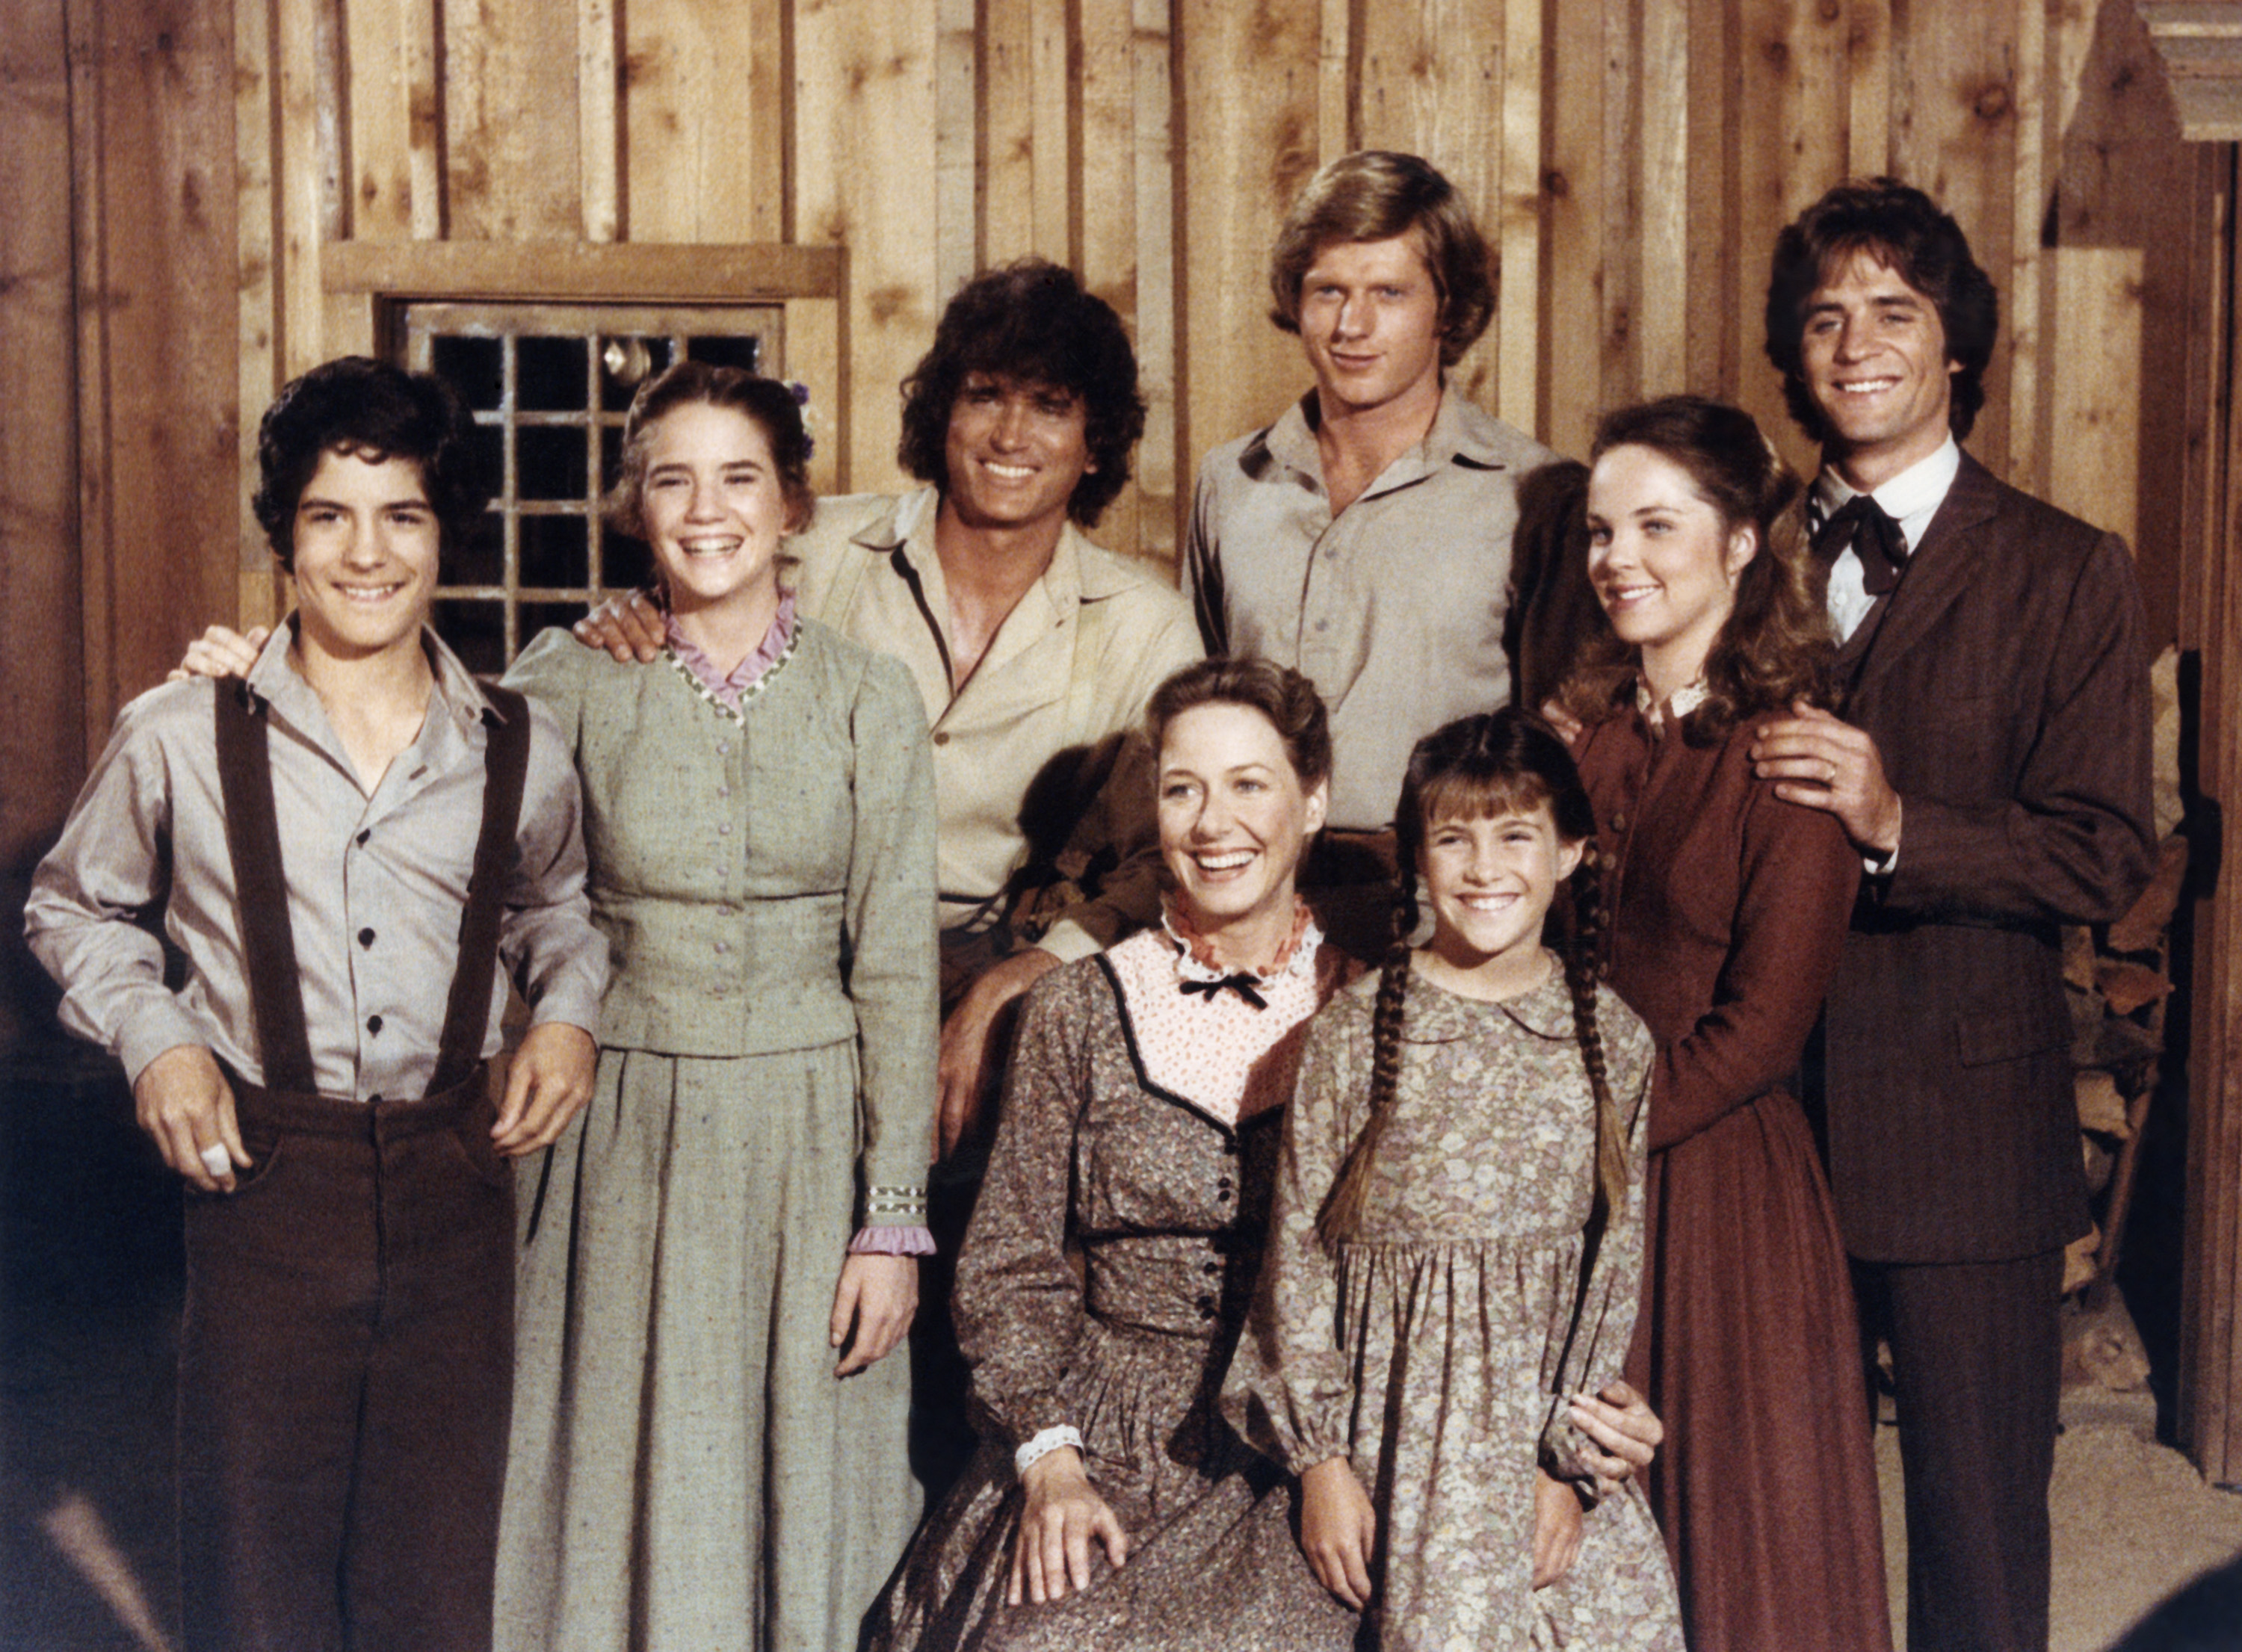 The cast of Little House on the Prairie pose together.